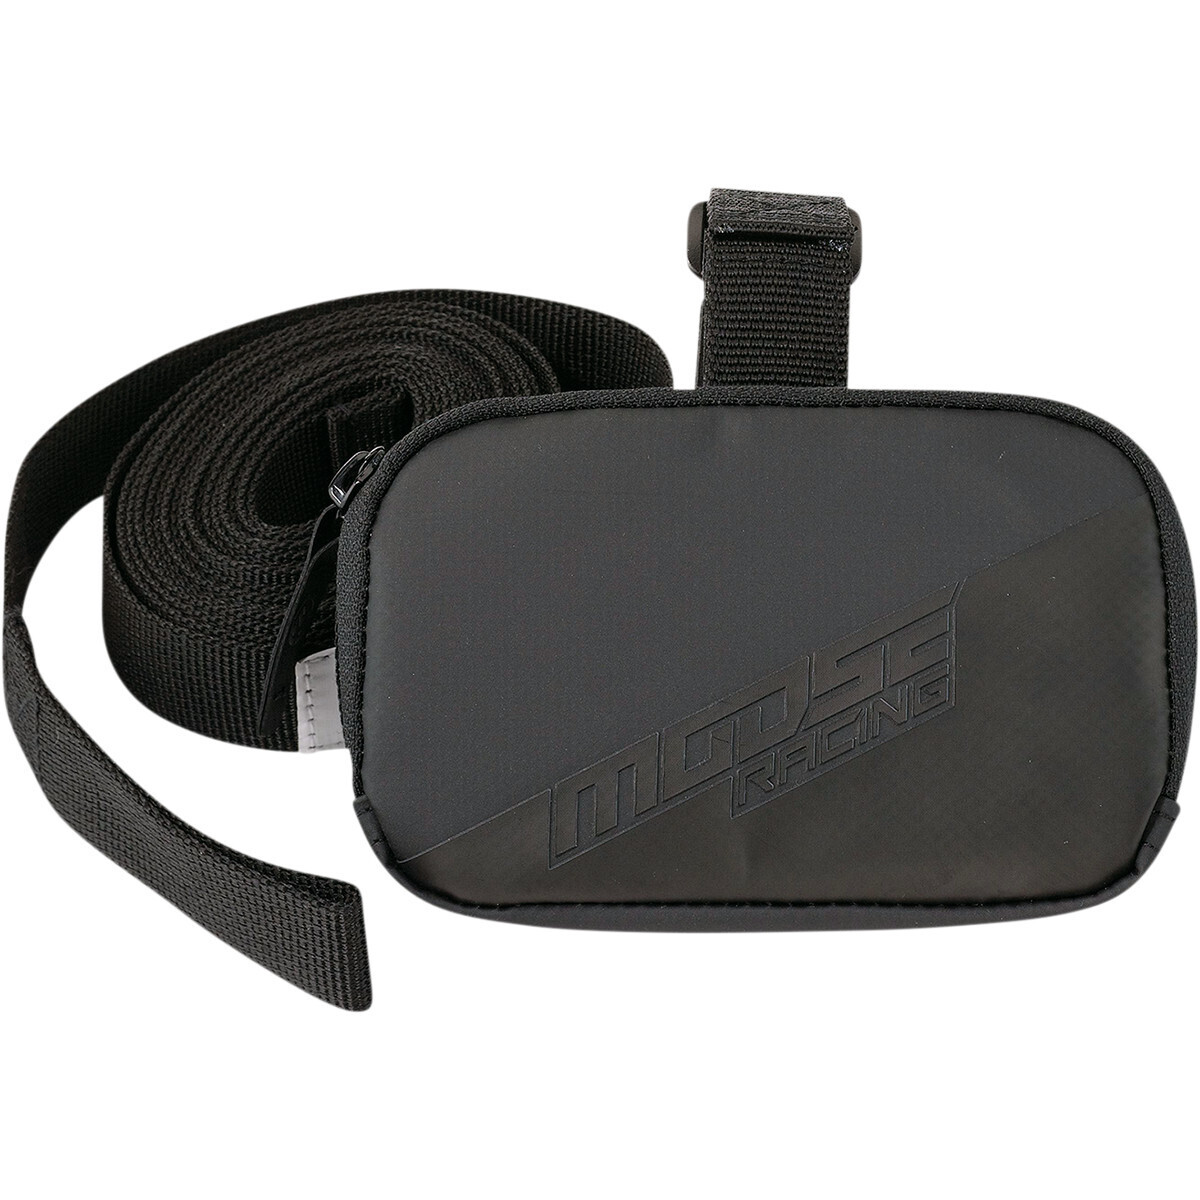 MOOSE RACING SOFT-GOODS
STRAP OFF-ROAD TRAIL